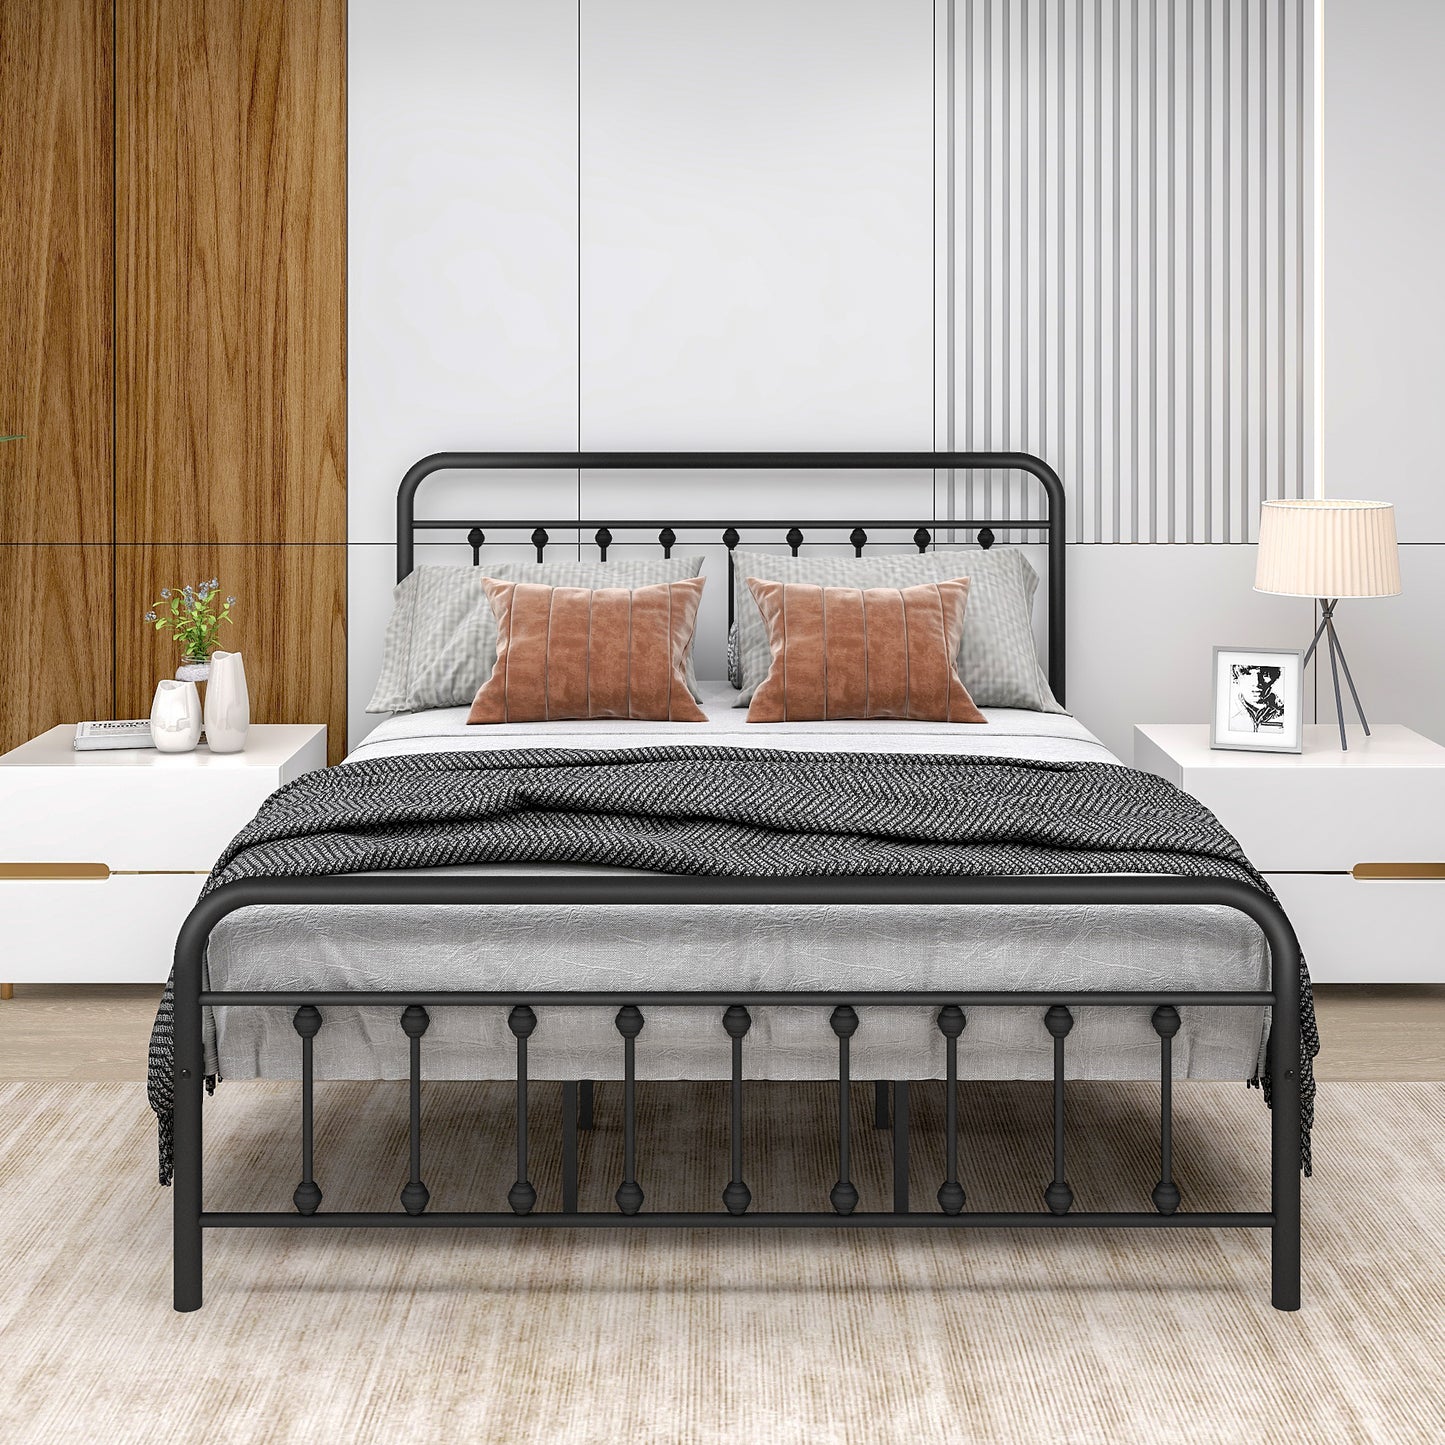 Black Iron Platform Bed Frame Queen Size with Vintage Headboard and Footboard, Metal Queen Bed Frame Mattress Foundation with 600LBS Load Capacity, No Box Spring Required, Space Saving Design